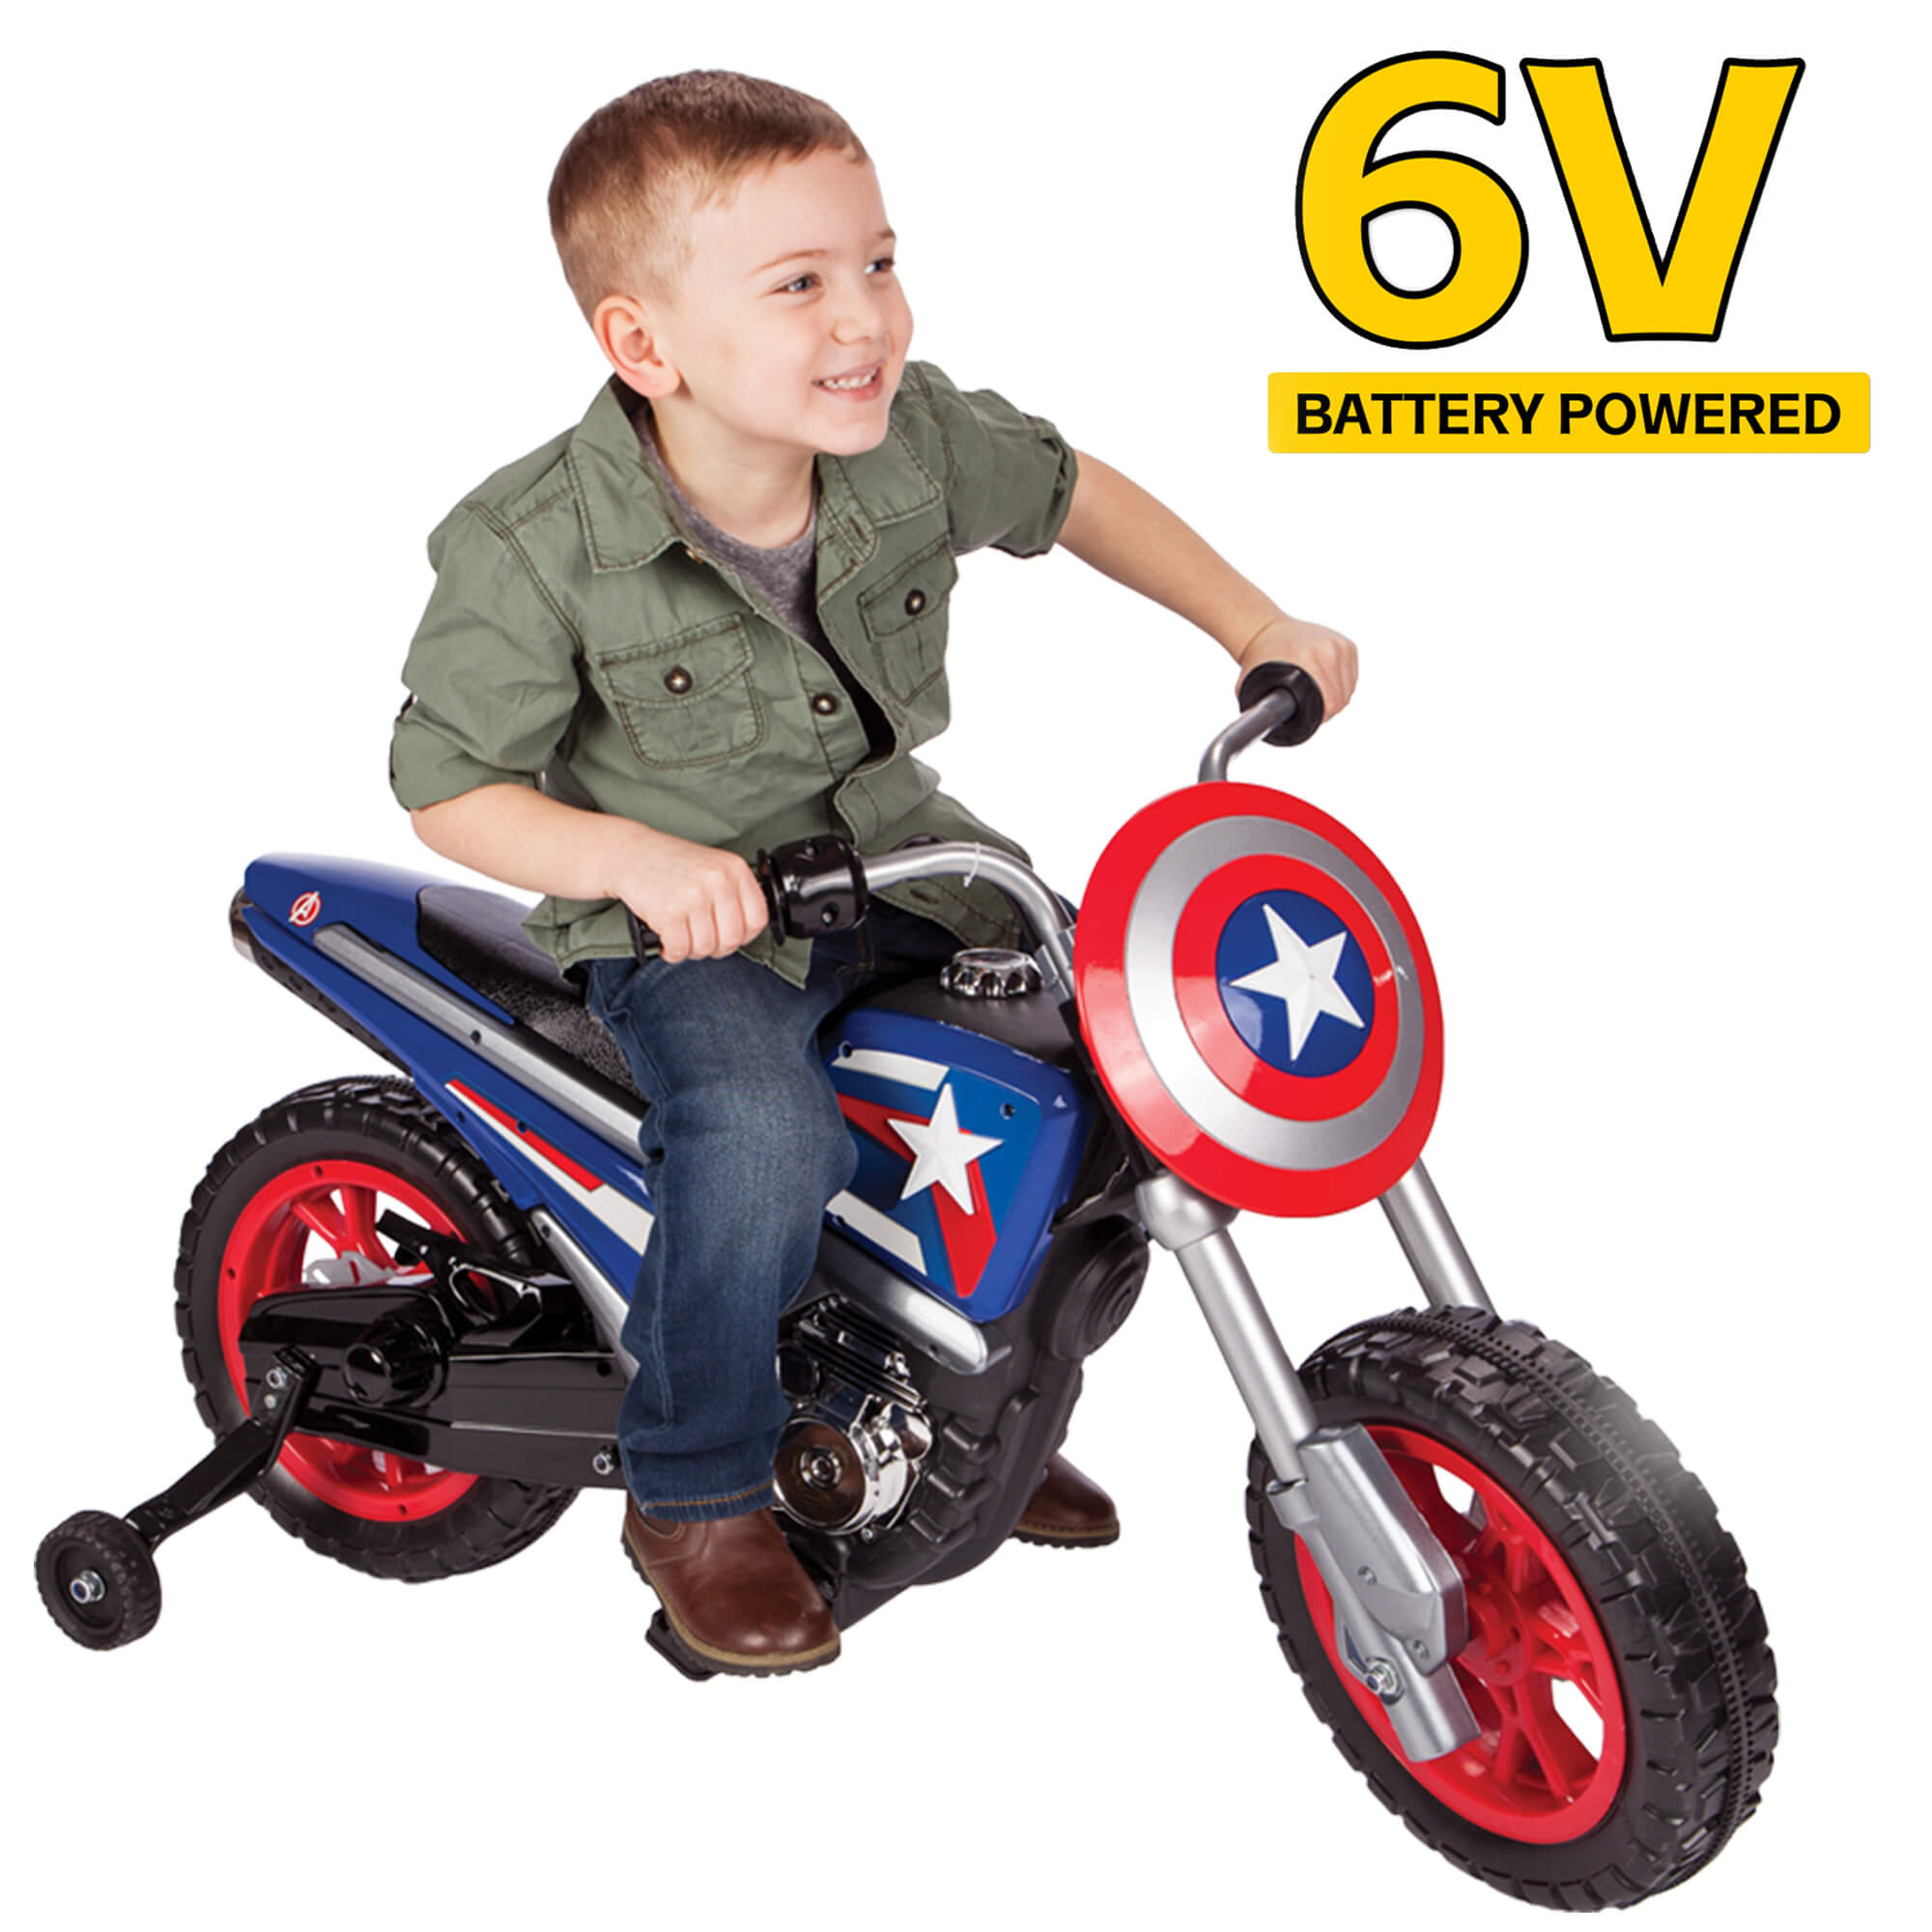 Captain America 6V Battery-Powered Ride-On Toy by Huffy - image 4 of 6